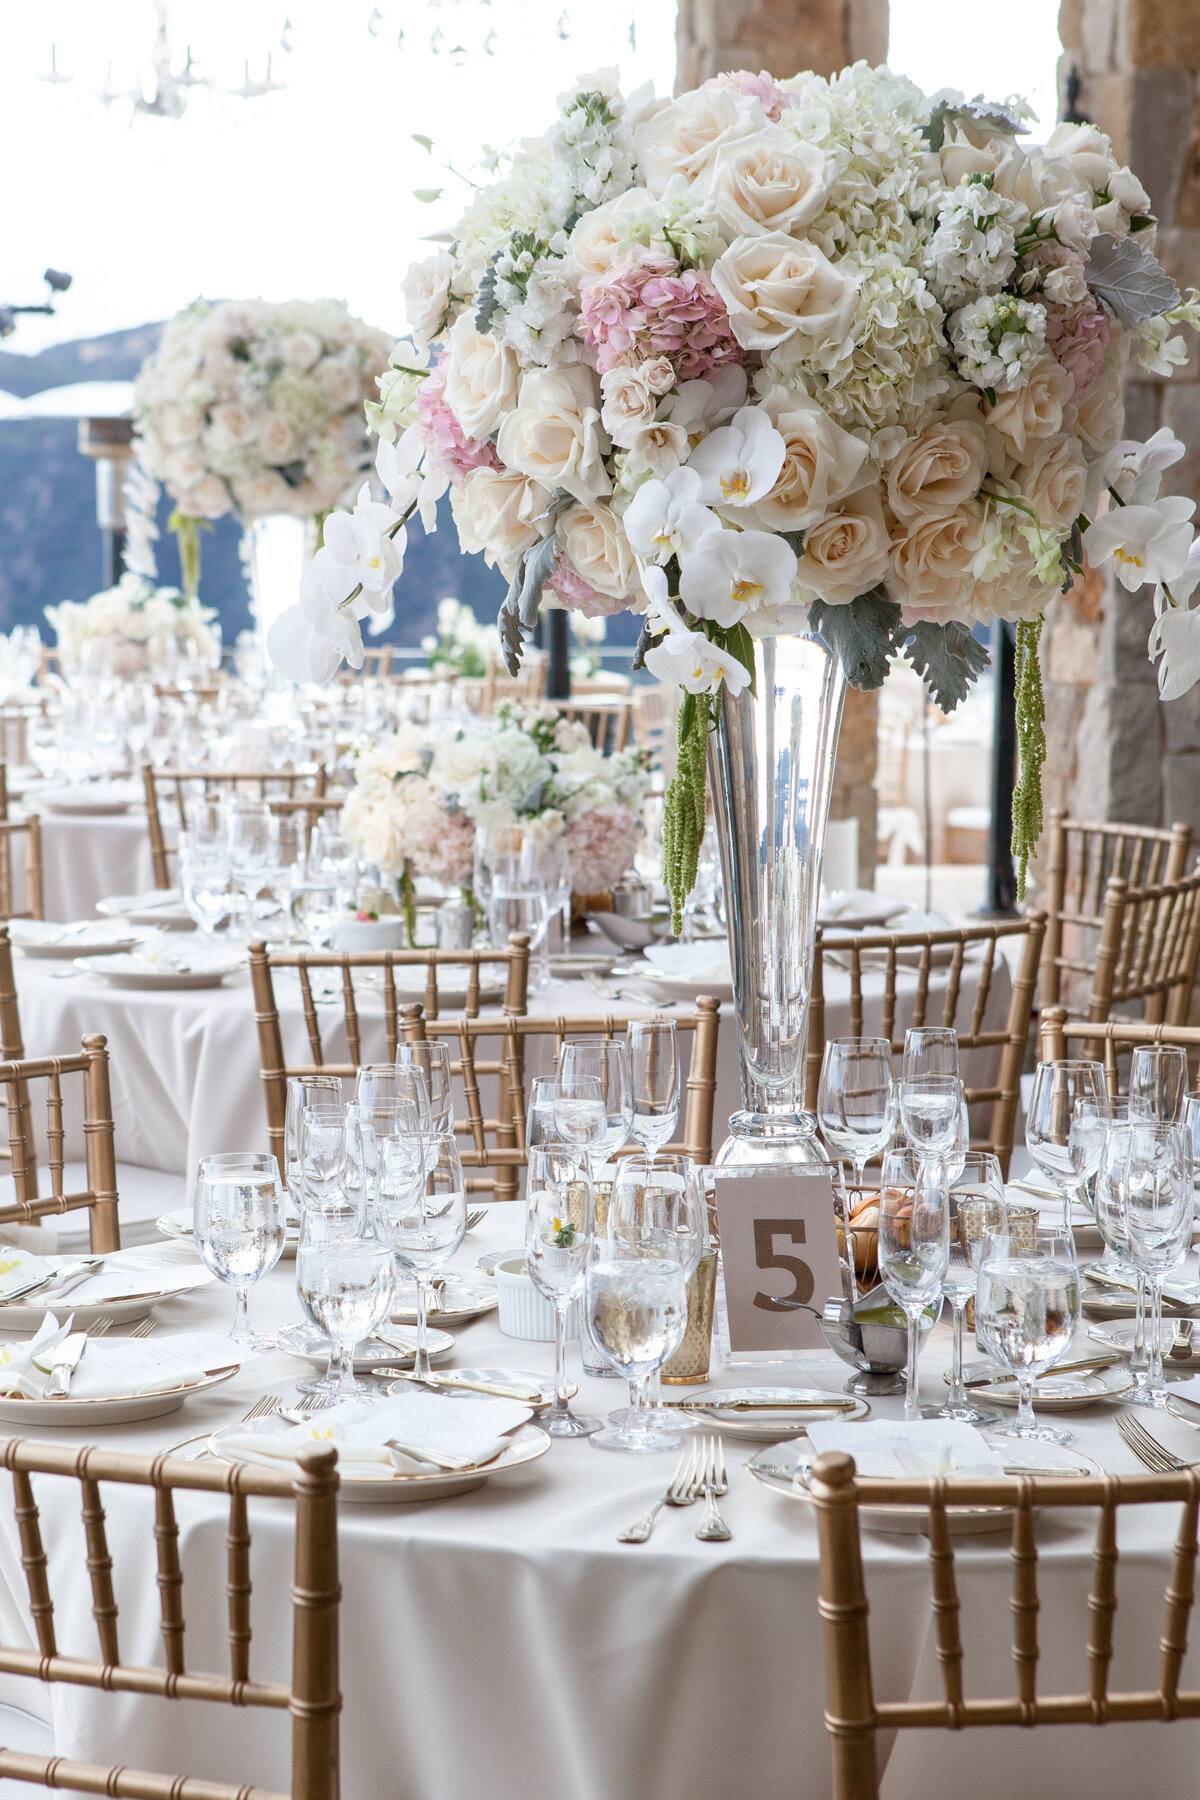 Tall Centerpieces with Pink and White Flowers